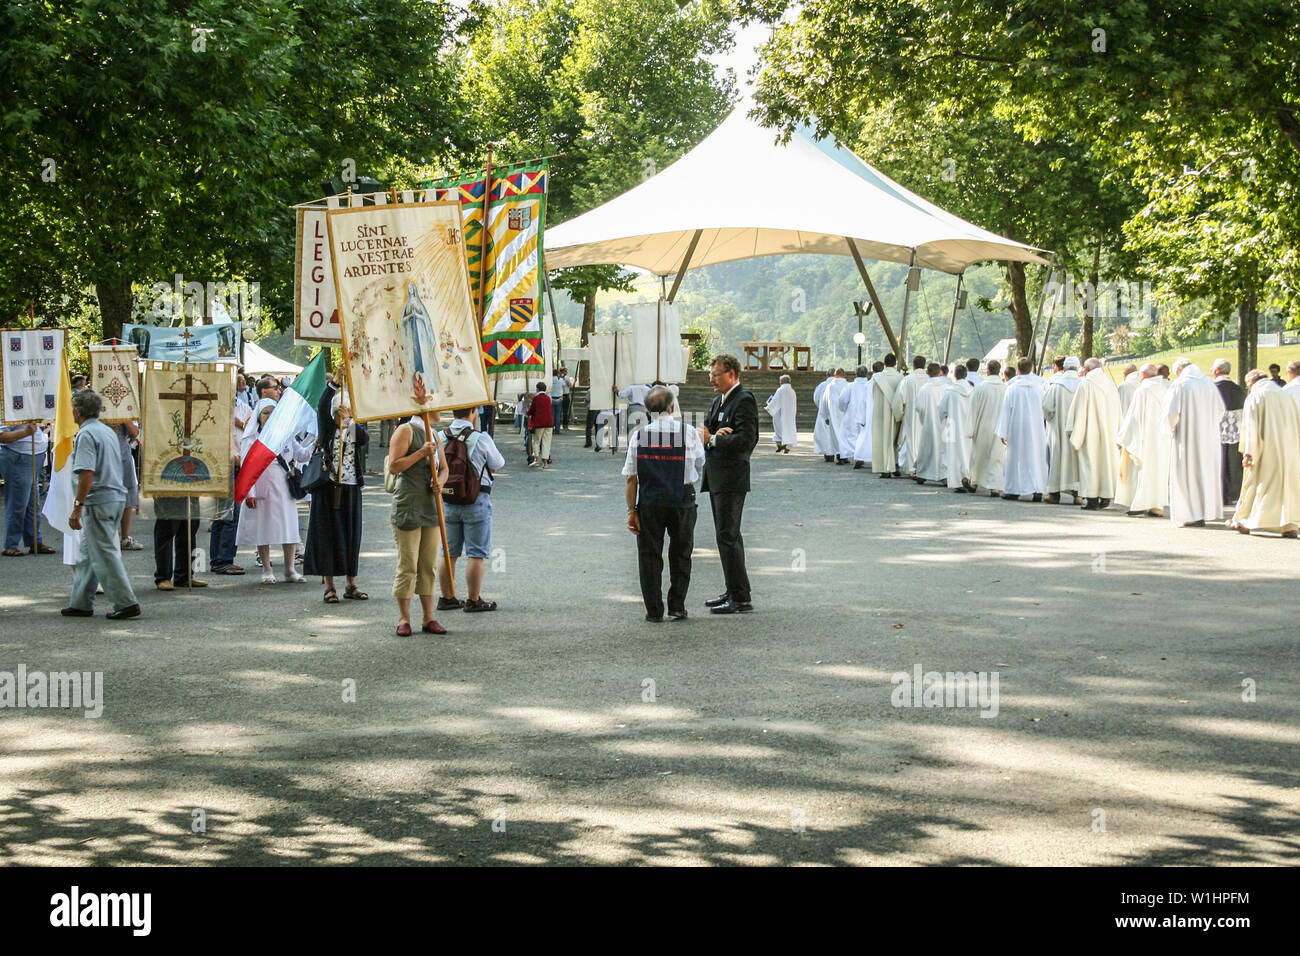 LOURDES, FRANCE - AUGUST 22, 2006: Pilgrims, priests and volunteers getting ready for a procession to the Virgin Mary (Vierge Marie) in Notre Dame de Stock Photo